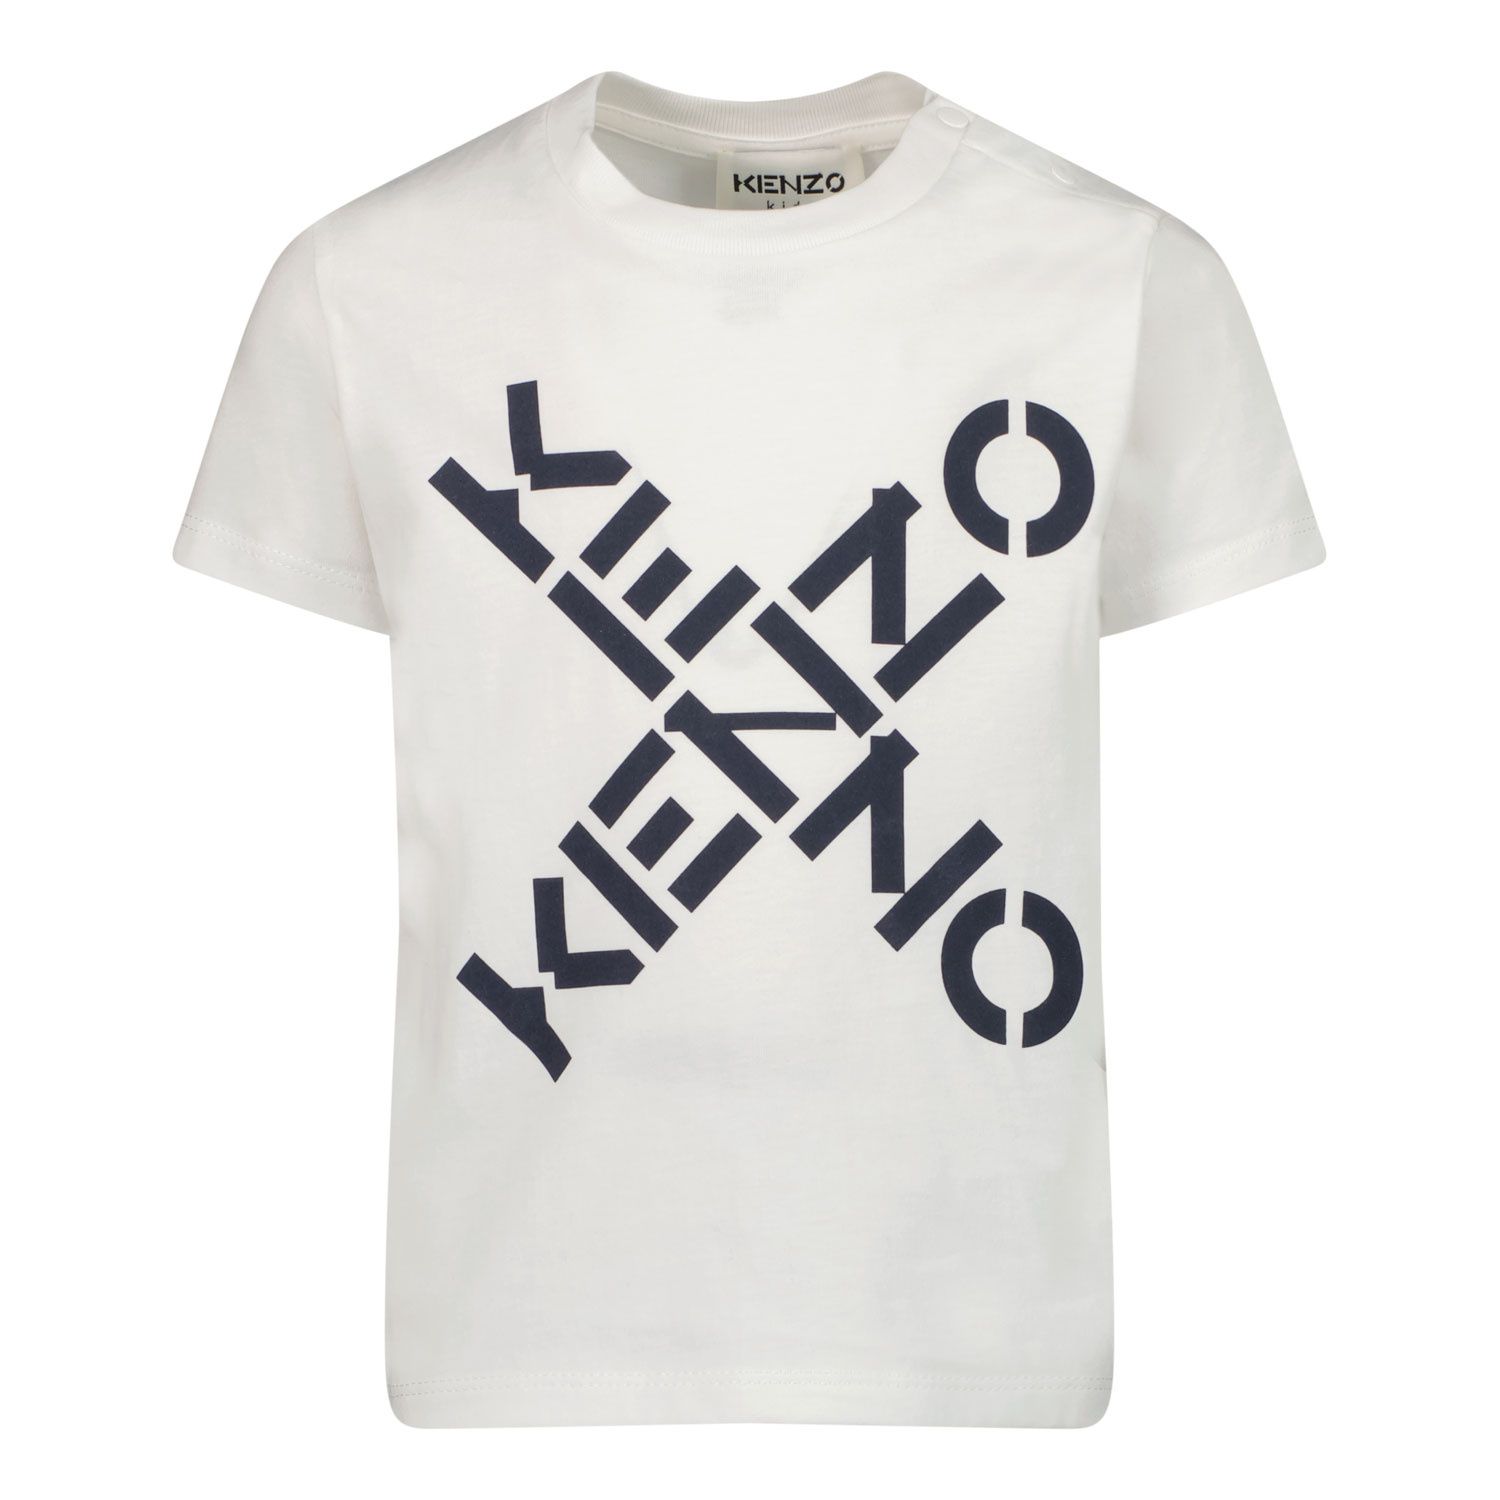 Picture of Kenzo K05395 baby shirt off white